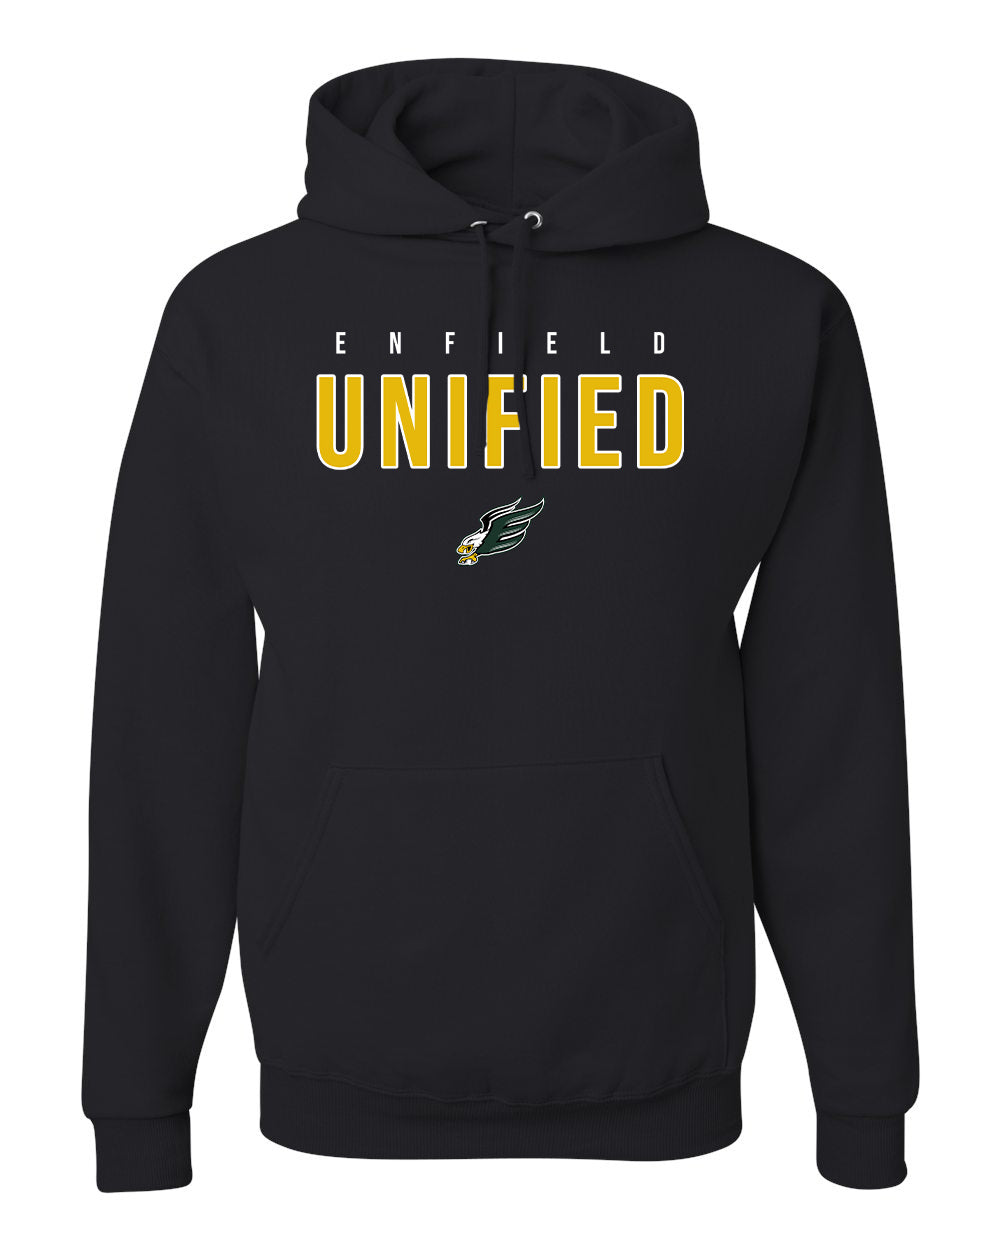 Unified Hoodie - 996MR (color options available)